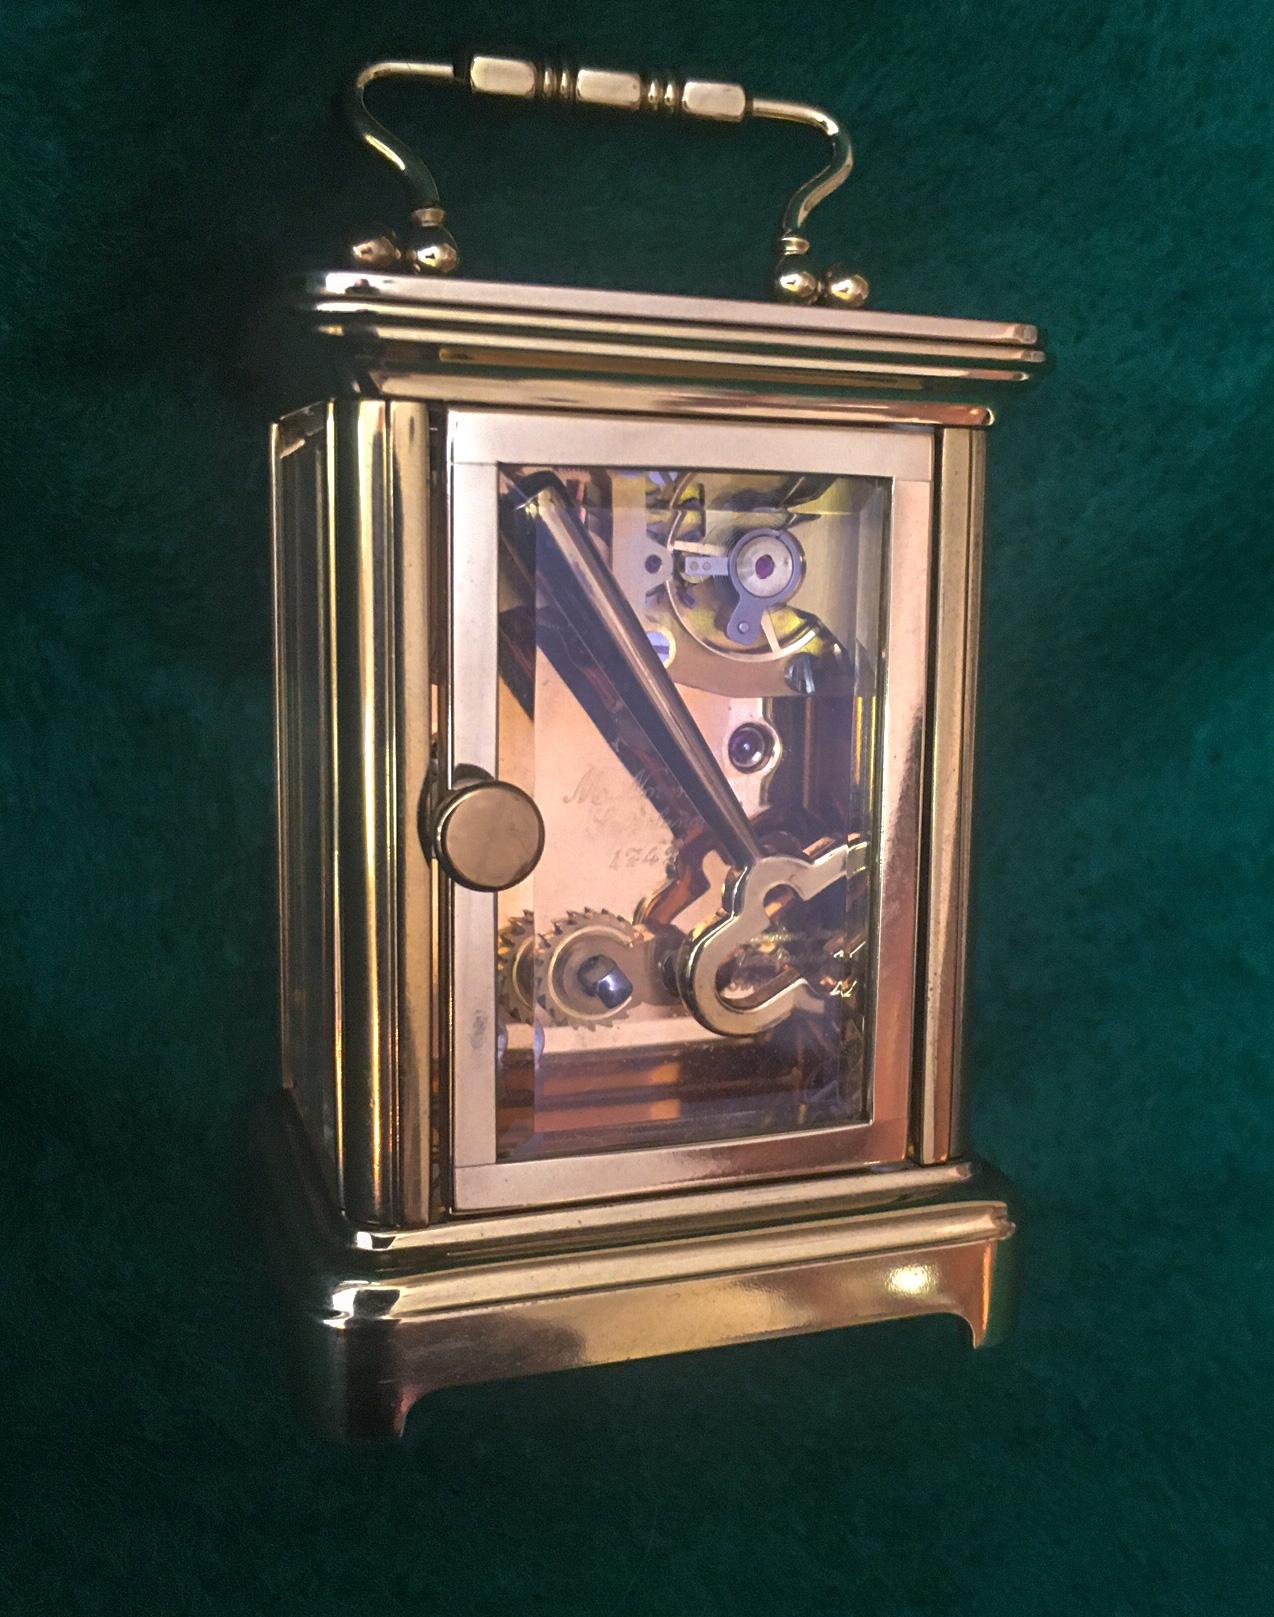 This very petite miniature carriage clock was made by Mathew Norman of
Switzerland and retains the original key.
Features include a miniature brass Corniche case with rectangular
top and folding handle over four beveled glass sides held
by plain